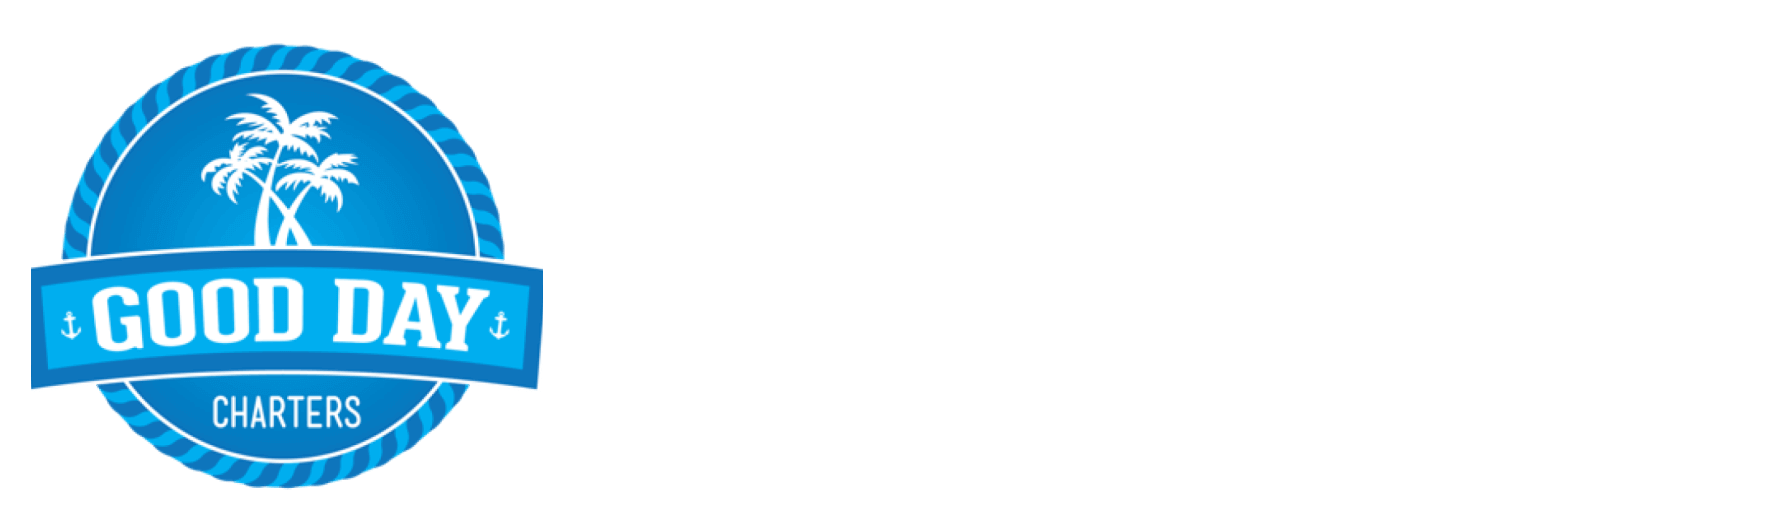 Your Boat. Your Way. Your Day.